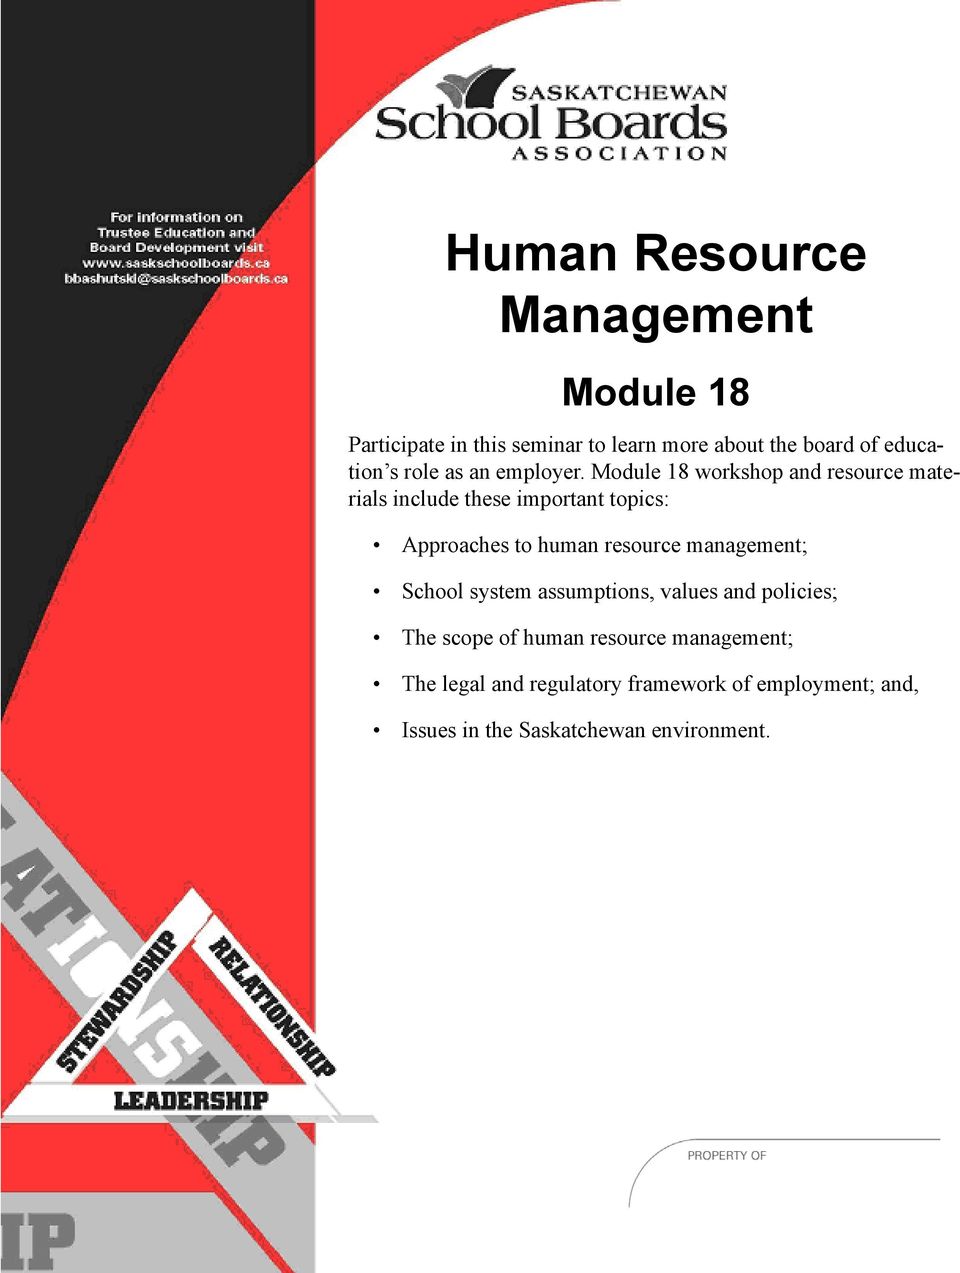 Module 18 workshop and resource materials include these important topics: Approaches to human resource